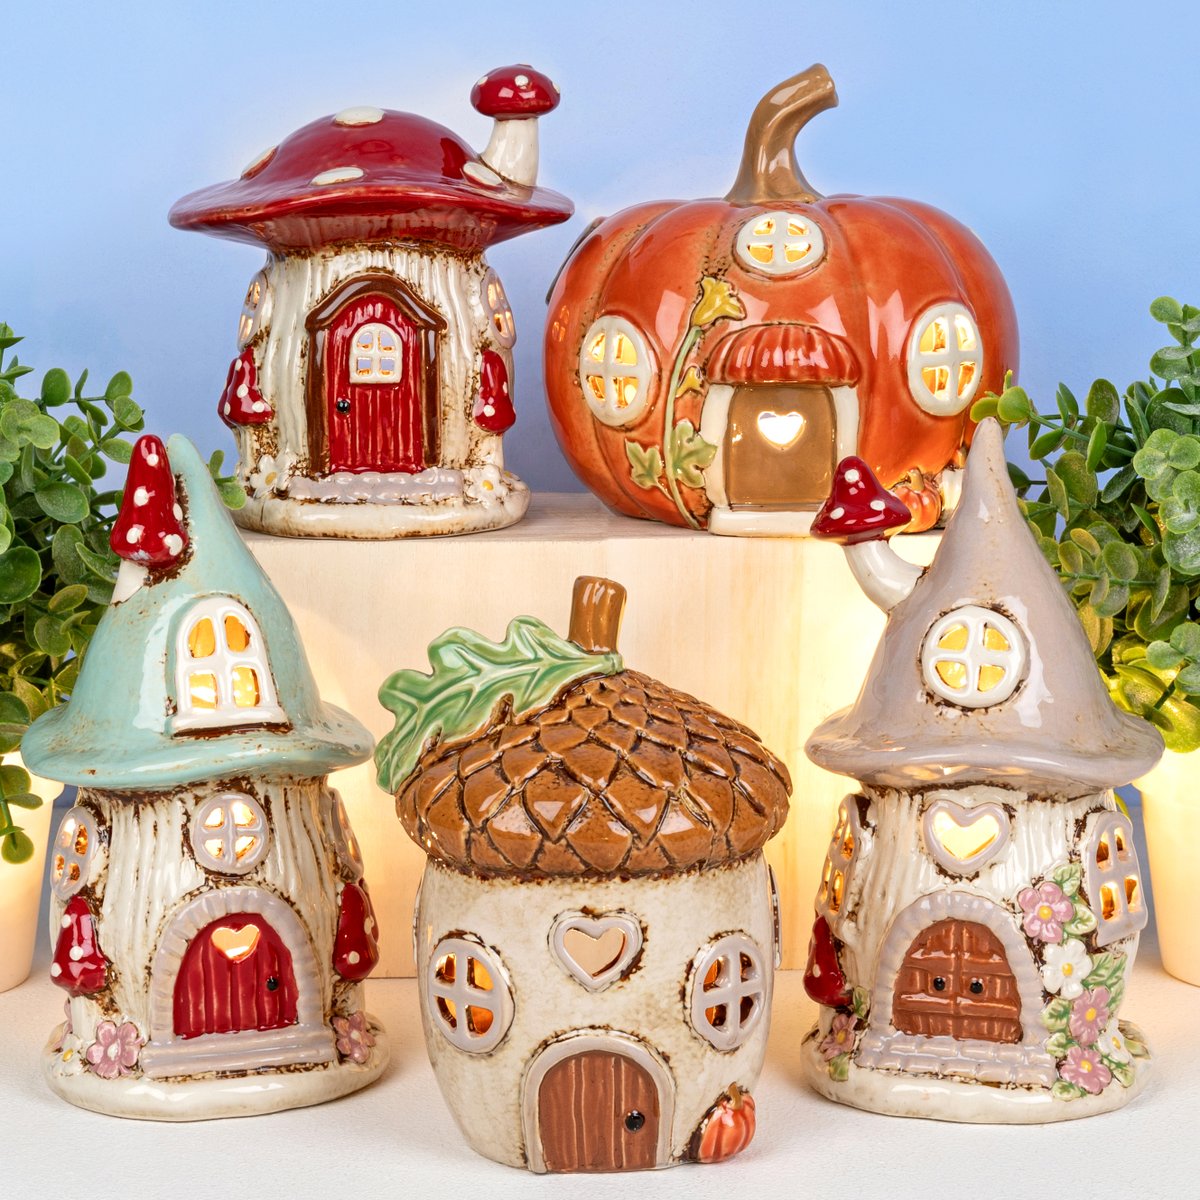 Add a touch of charm and warmth with our Village Pottery collection of tealight houses in various shapes and sizes. This range is fast becoming a collectable with people creating their own streets and villages. Follow the link below to see the full range; shop.joedavies.co.uk/range/wr13219